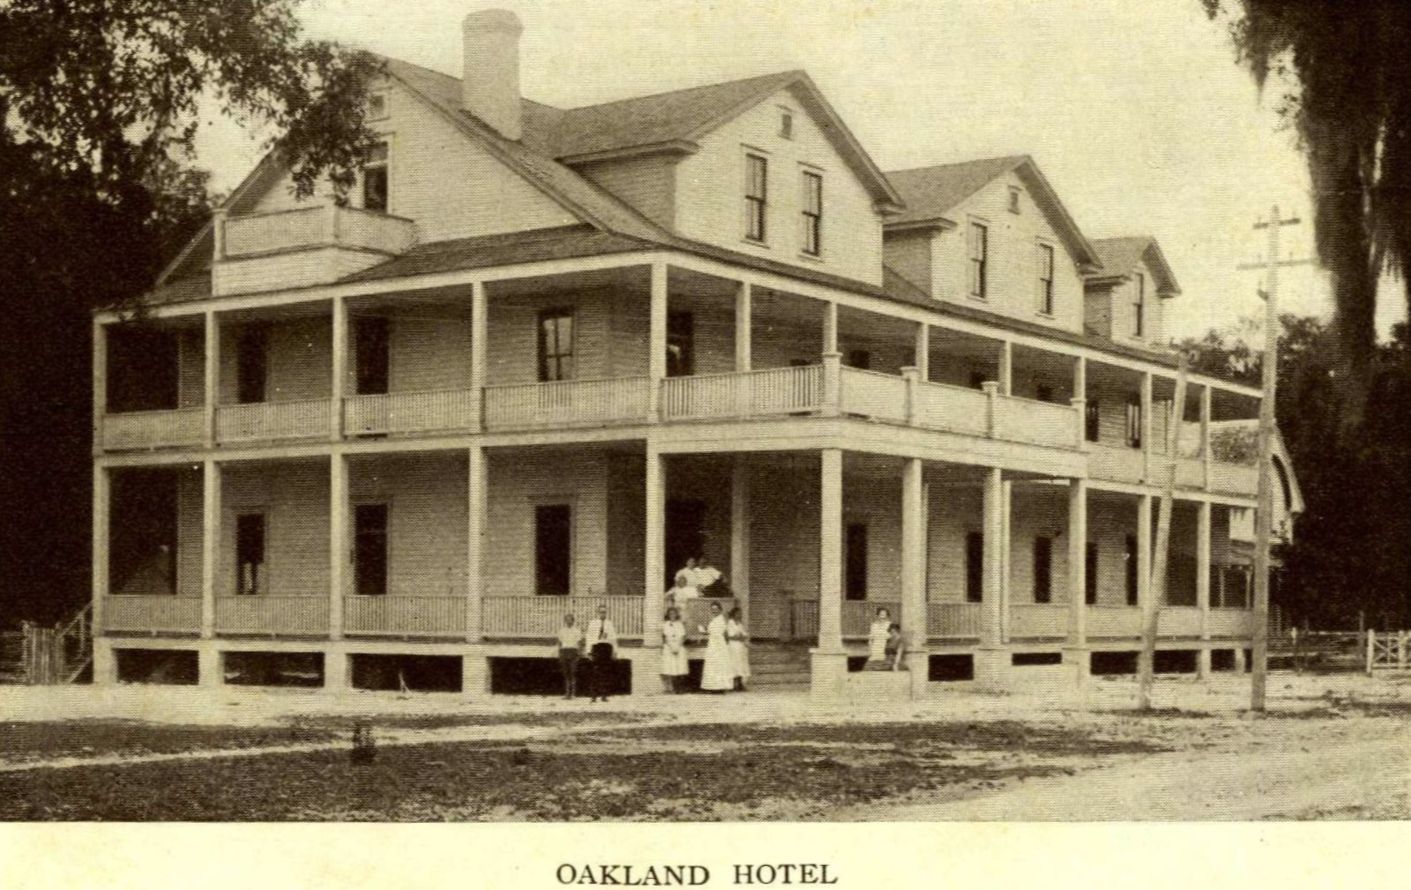 The Oakland Hotel, which opened in 1910.